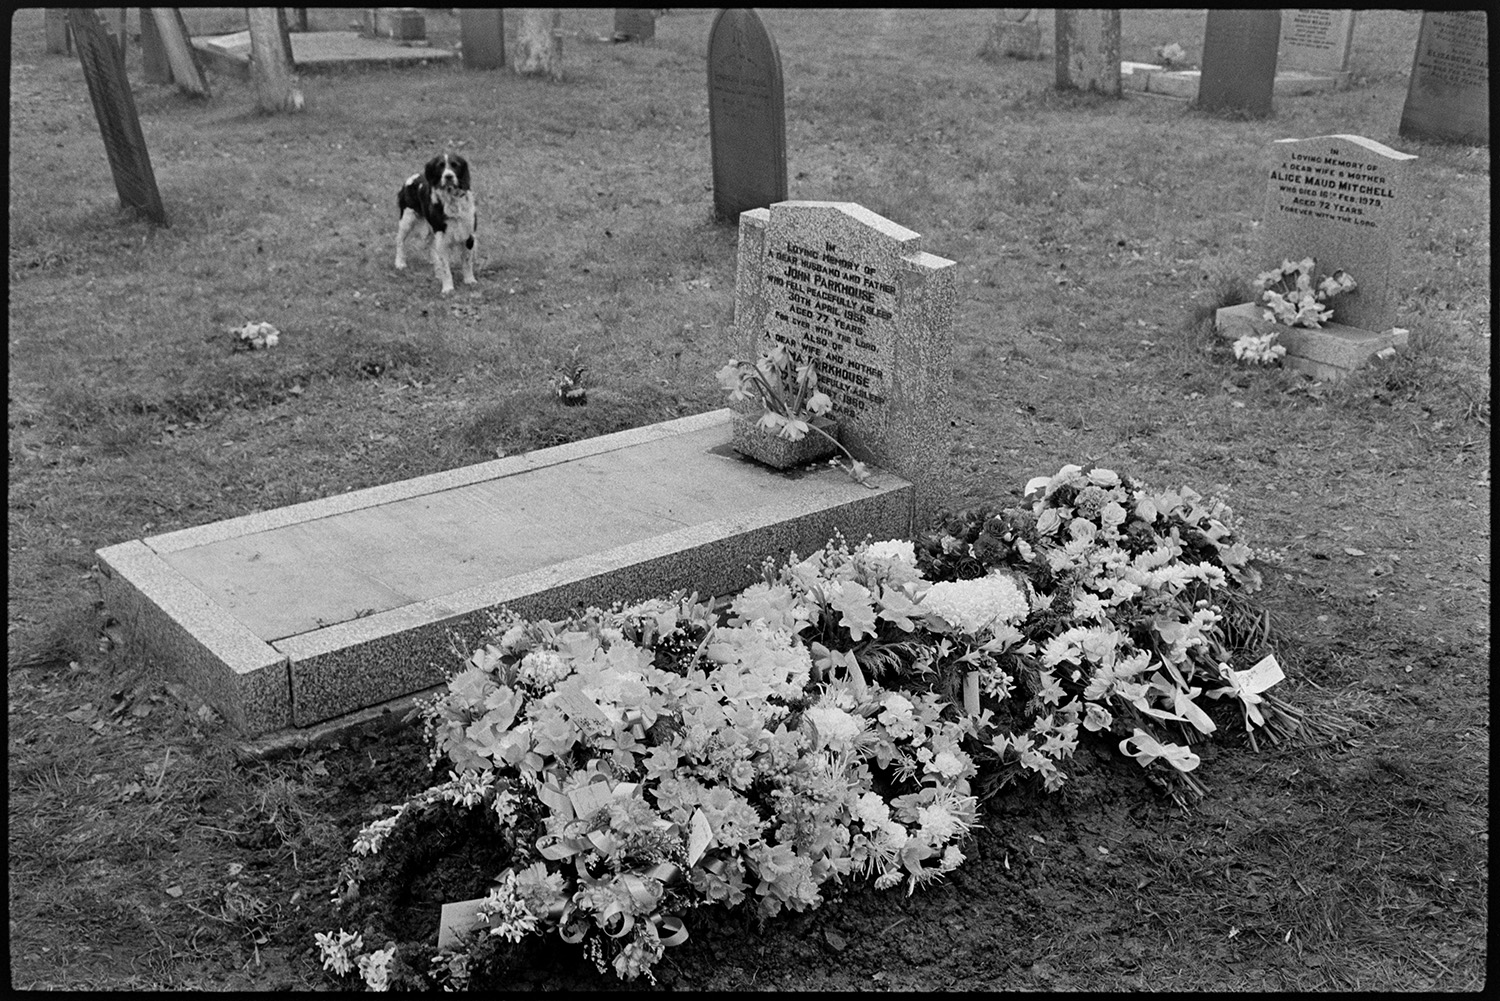 Gravedigger arranging flowers after funeral. 
[Flowers on Archie Parkhouse's grave after his funeral. His grave is next to his parents' grave in Dolton churchyard. A dog and other gravestones can be seen in the background.]